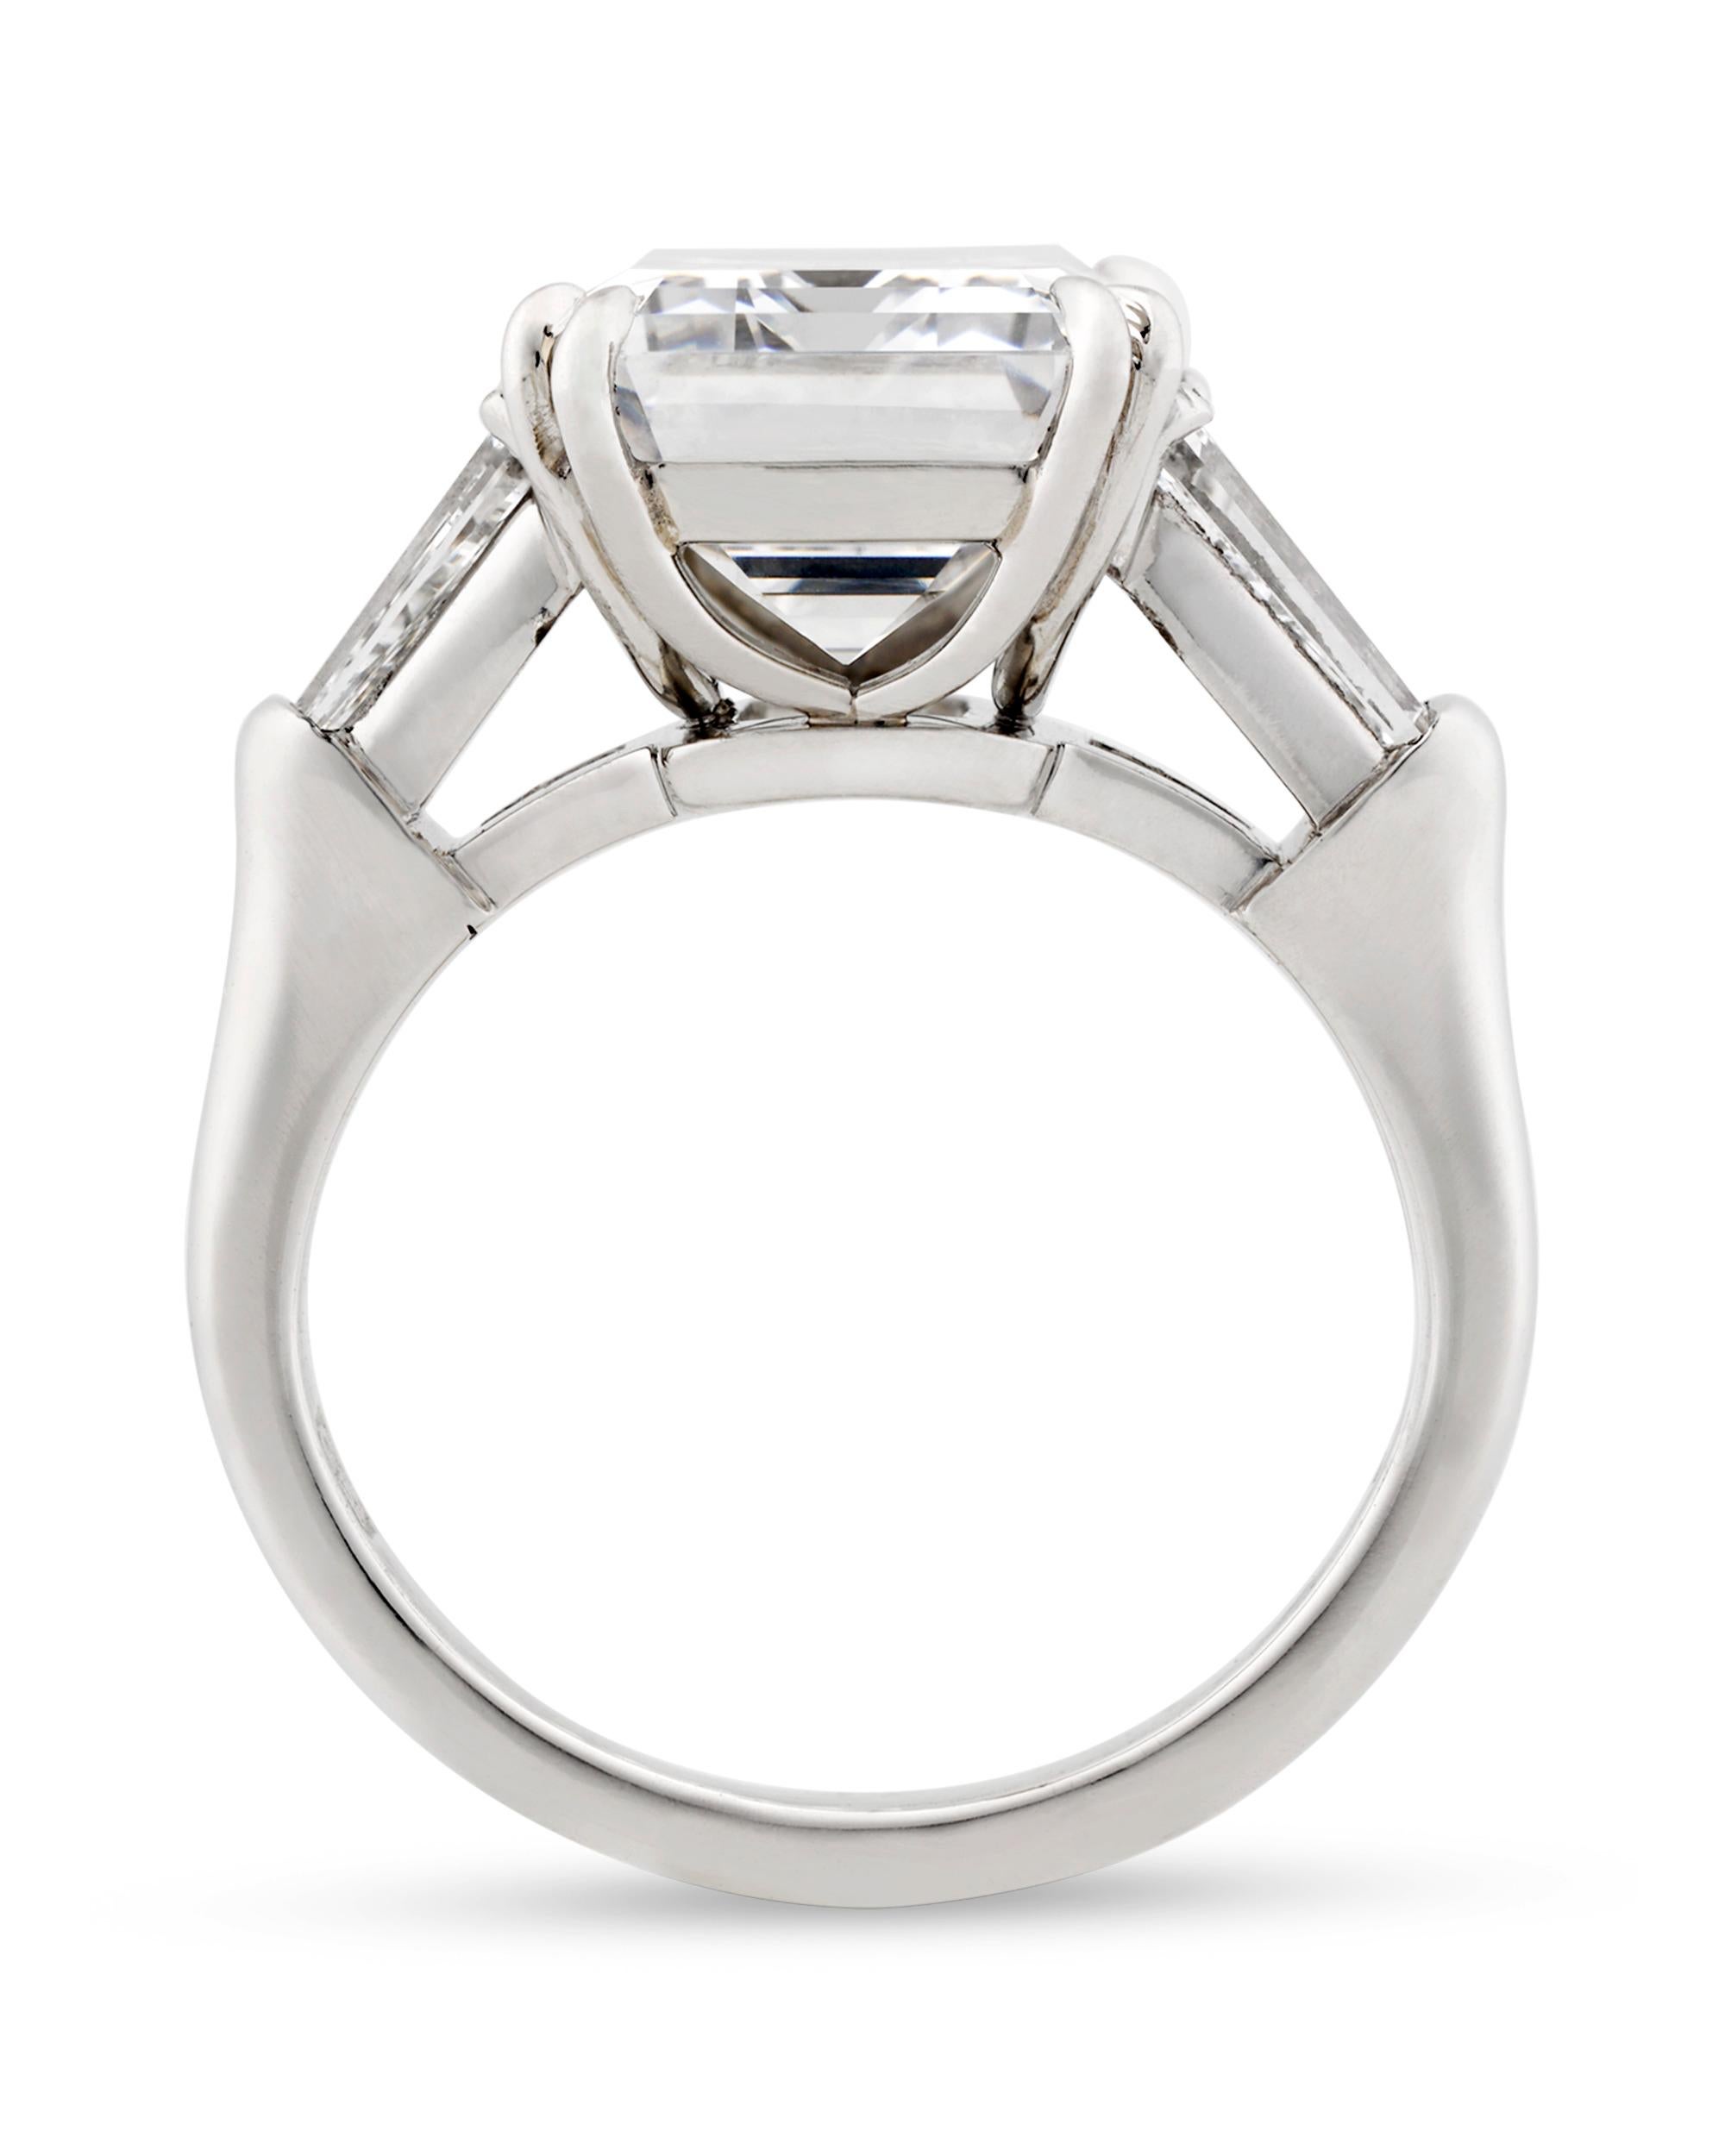 This classic Harry Winston ring is set with an exceptional 5.56-carat emerald-cut diamond that bears all the hallmarks of the legendary Golconda diamonds. The rare stone is certified by the Gemological Institute of America (GIA) as being D color and